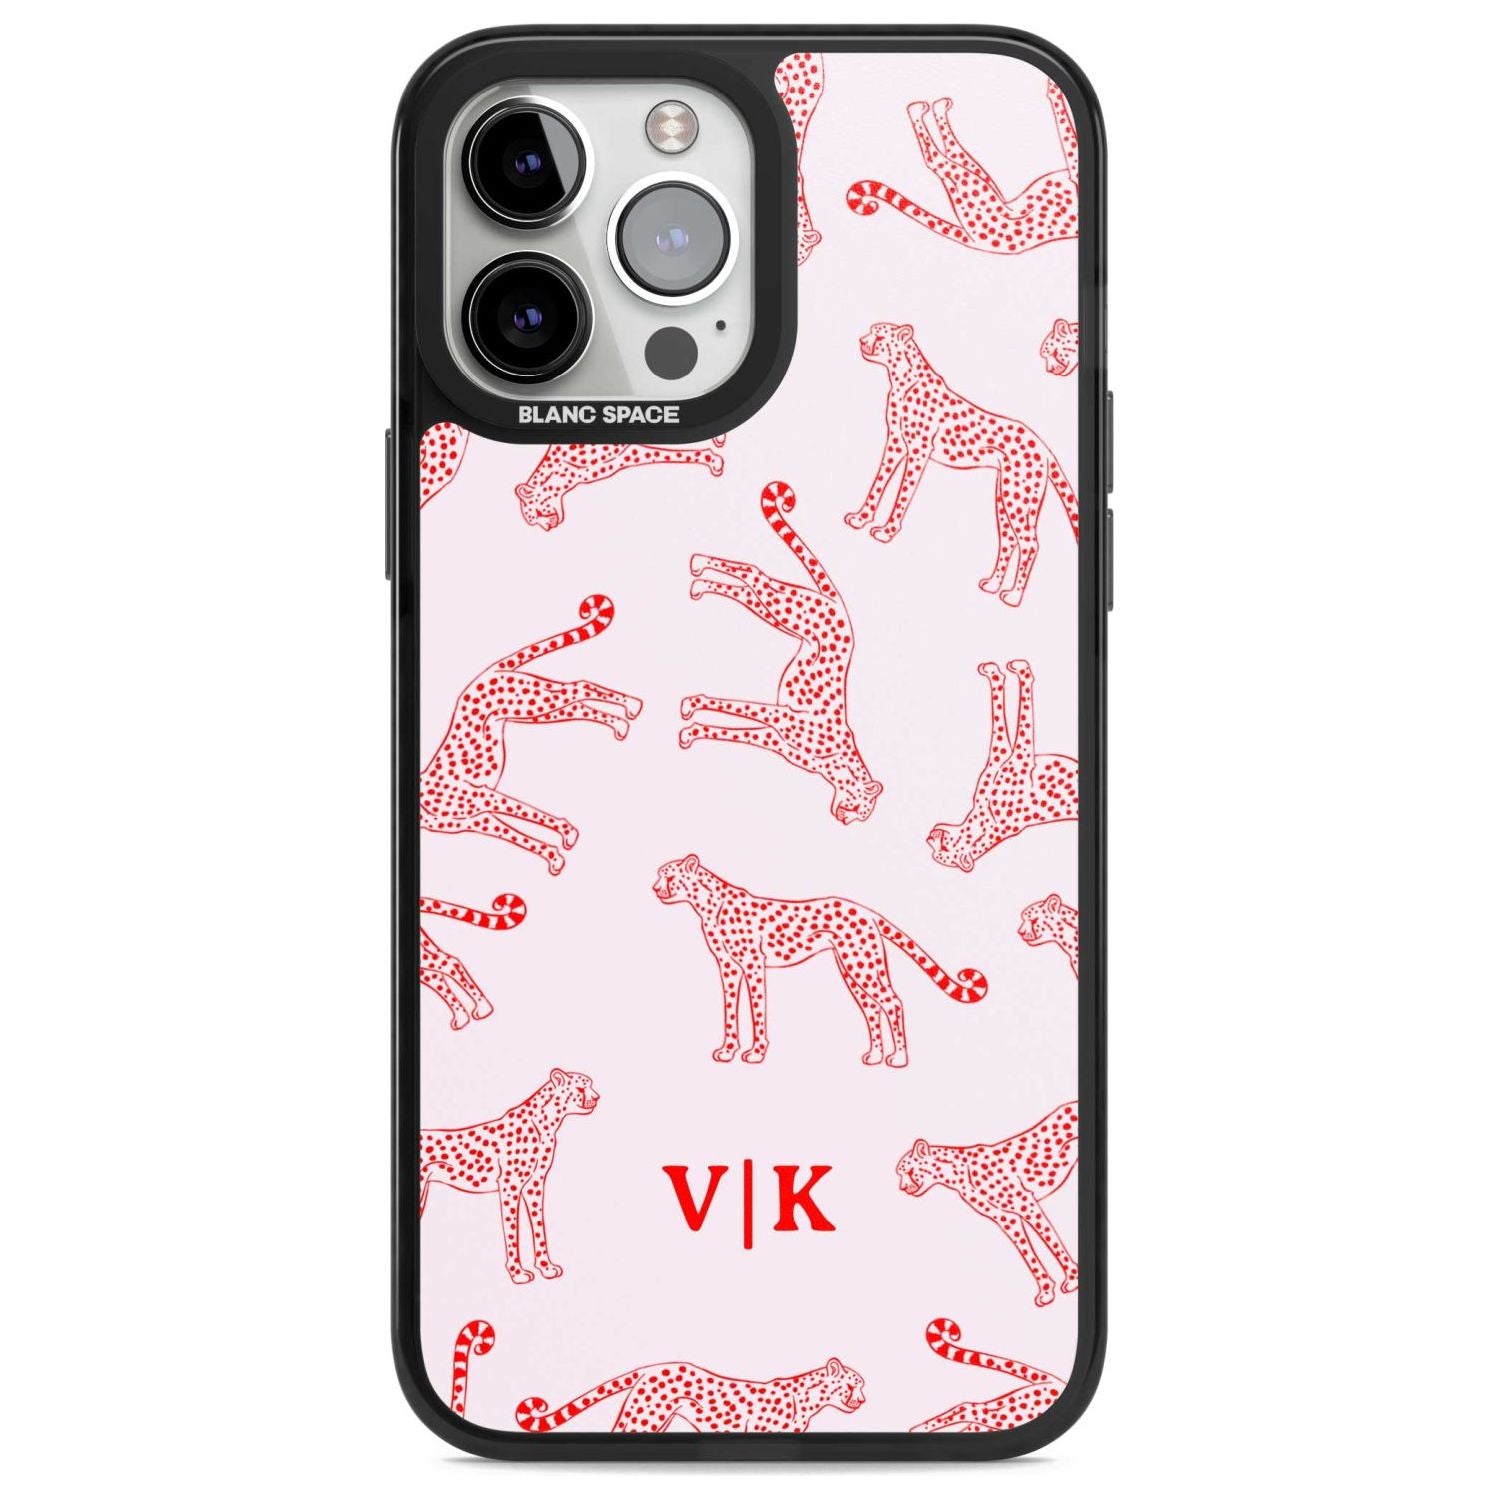 Personalised + Red & Pink Cheetah Custom Phone Case iPhone 13 Pro Max / Magsafe Black Impact Case Blanc Space